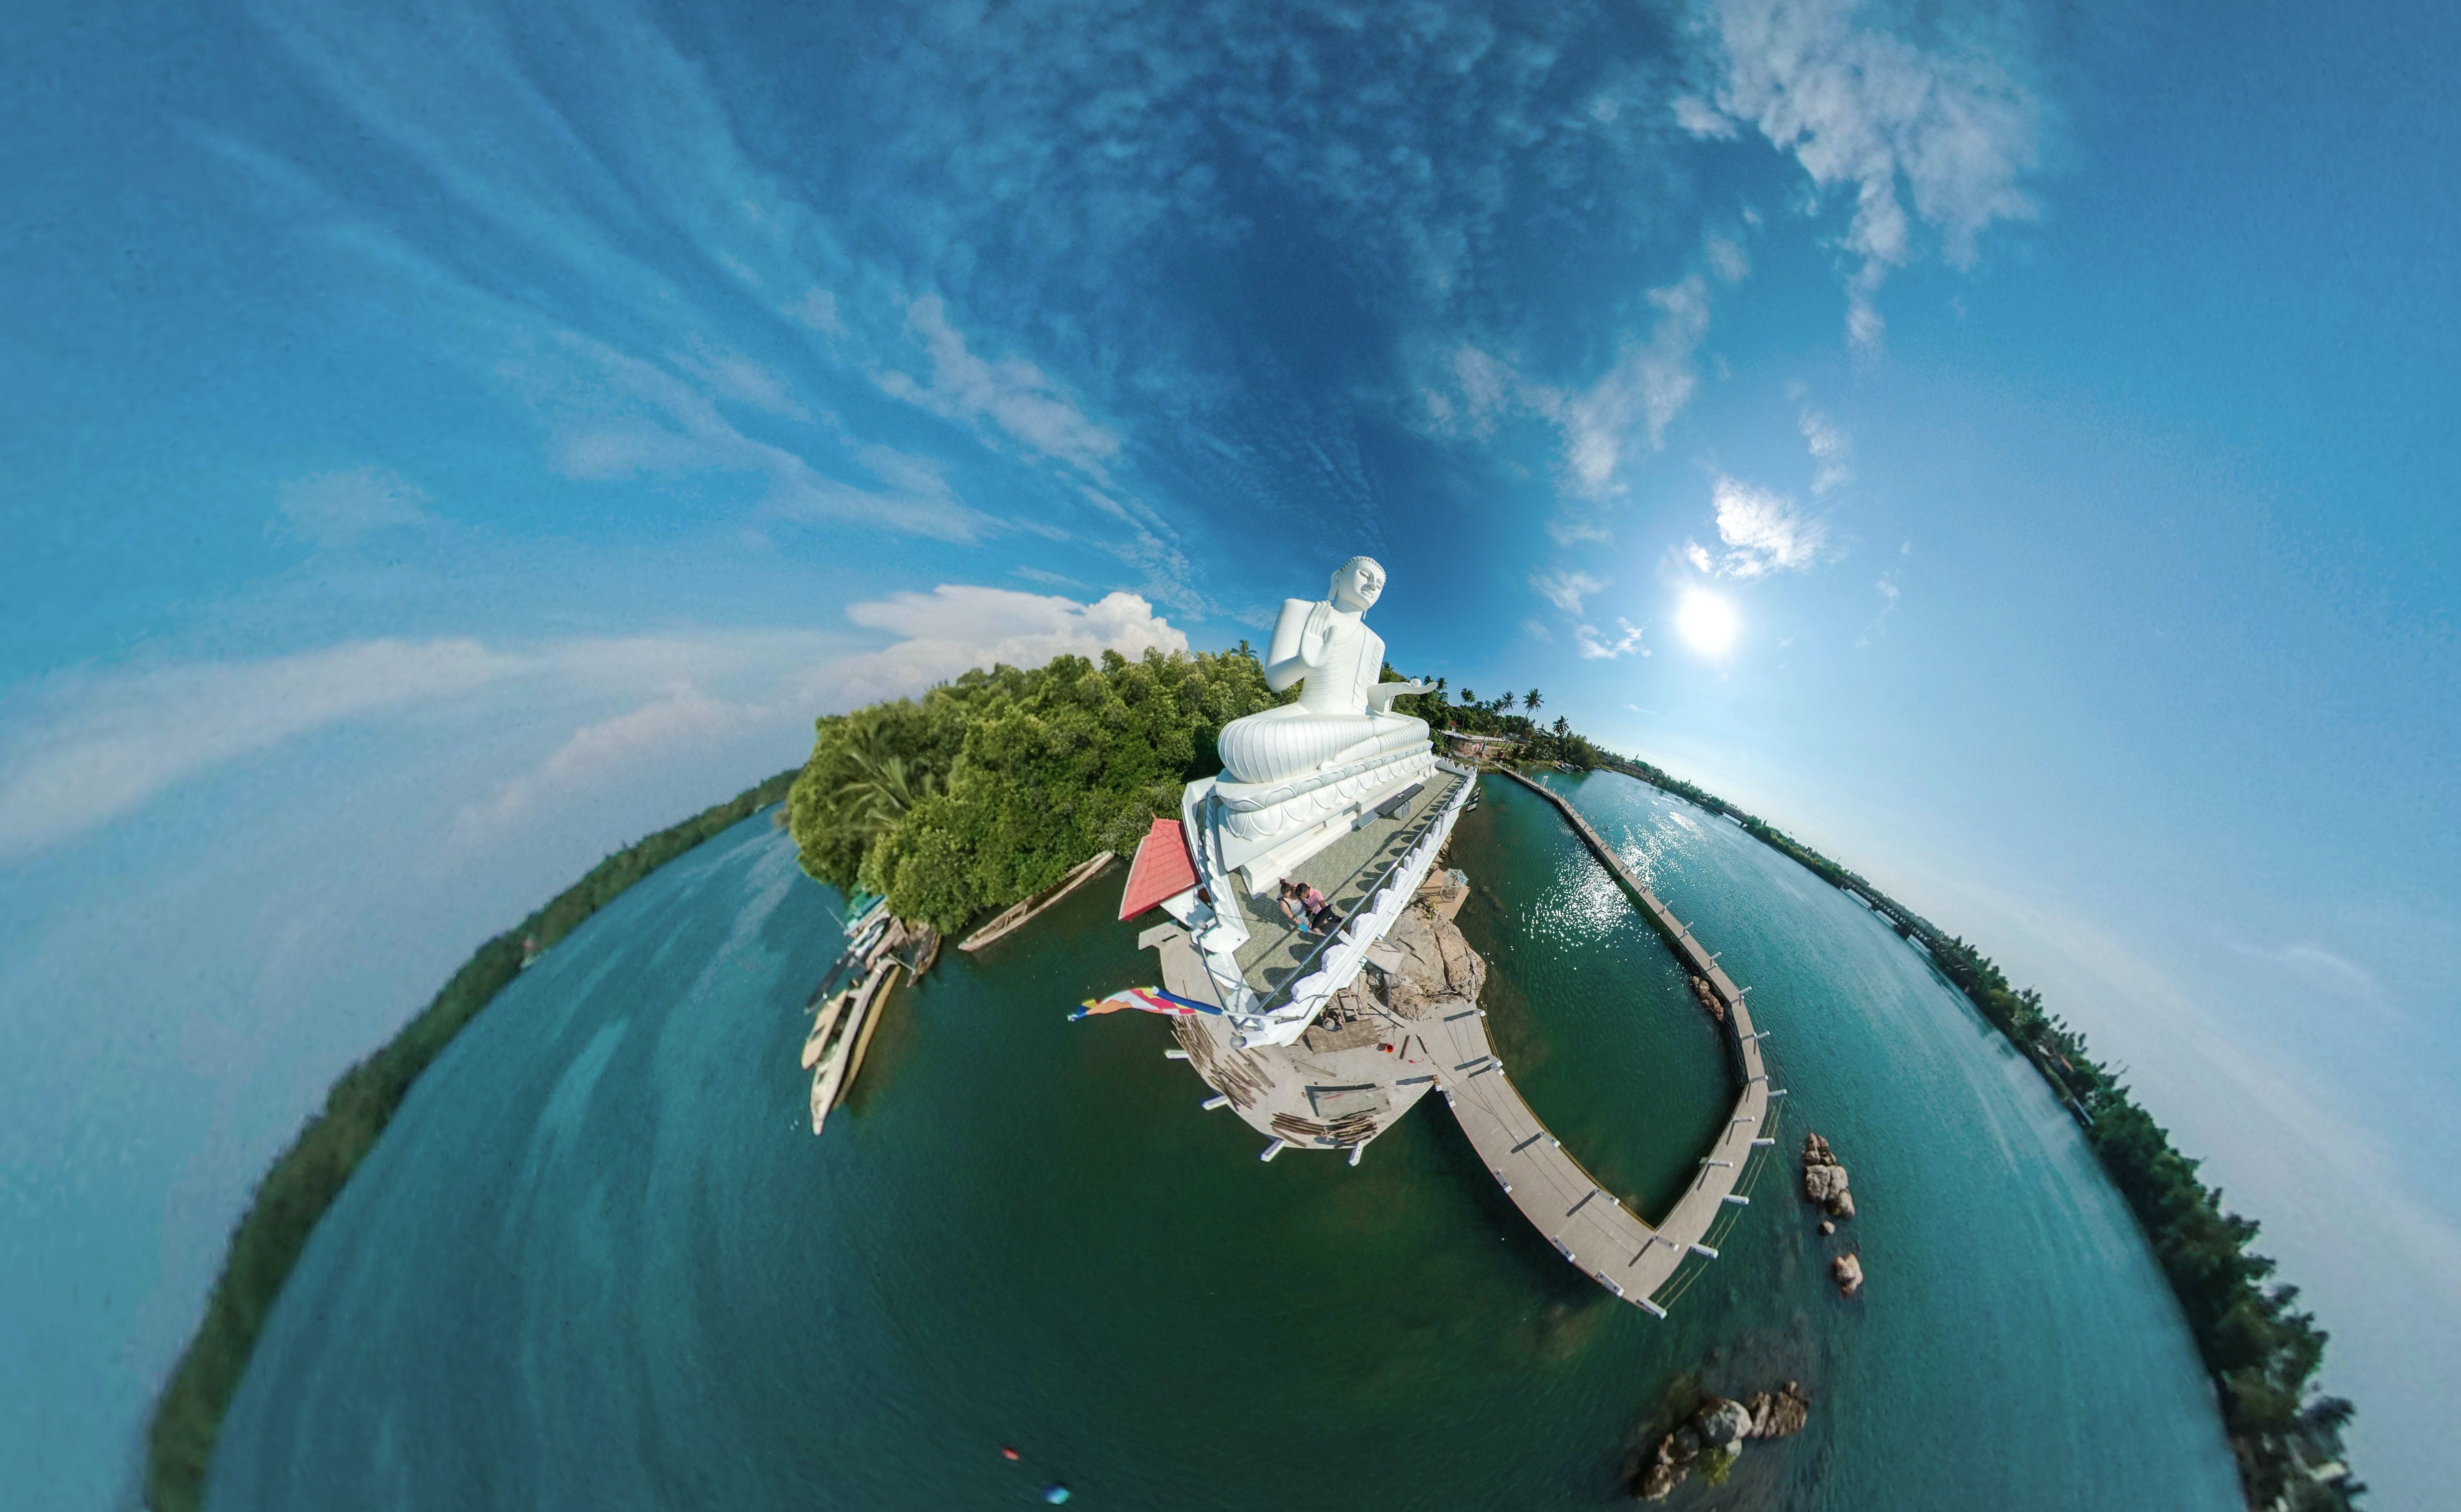 360 pictures of statue and water